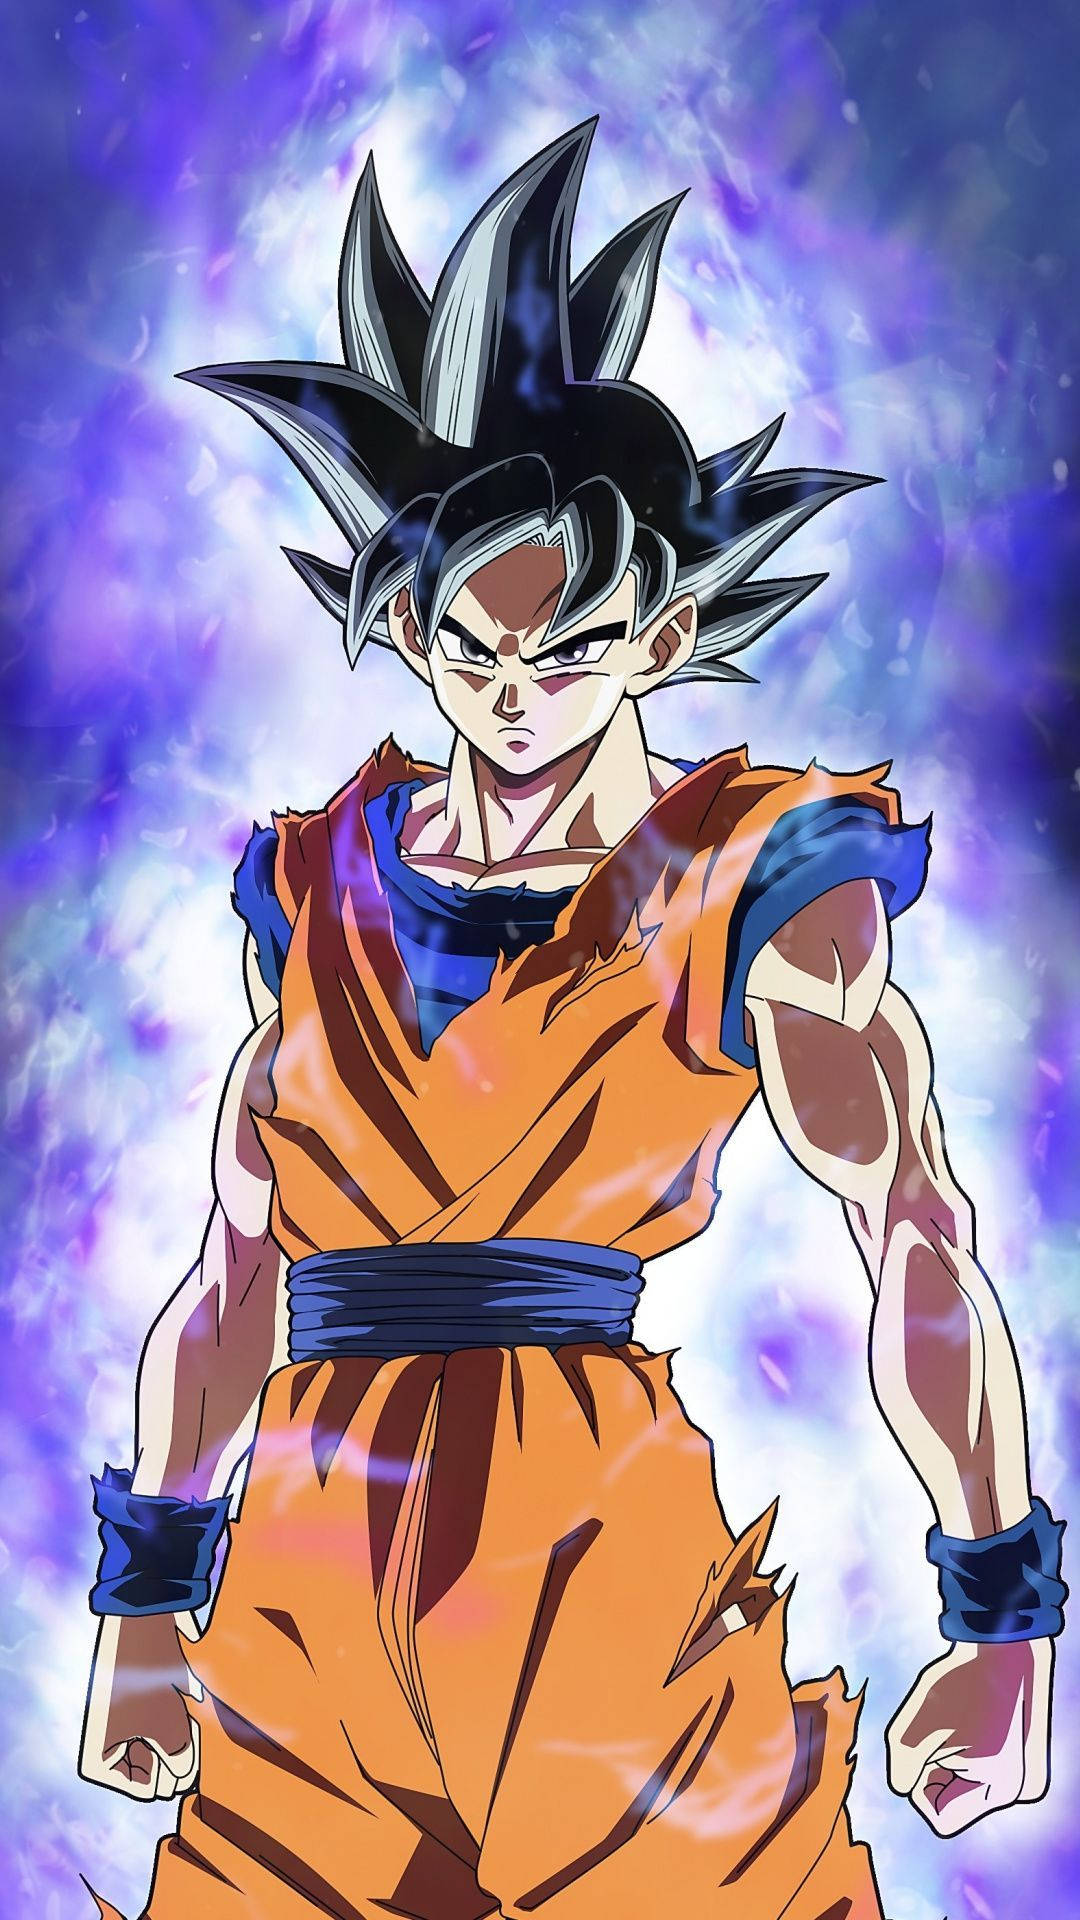 Goku reaches new ids of power as he unleashes the power of Super Saiyan Blue in this electrifying artwork from ‘Dragon Ball Z’. Wallpaper